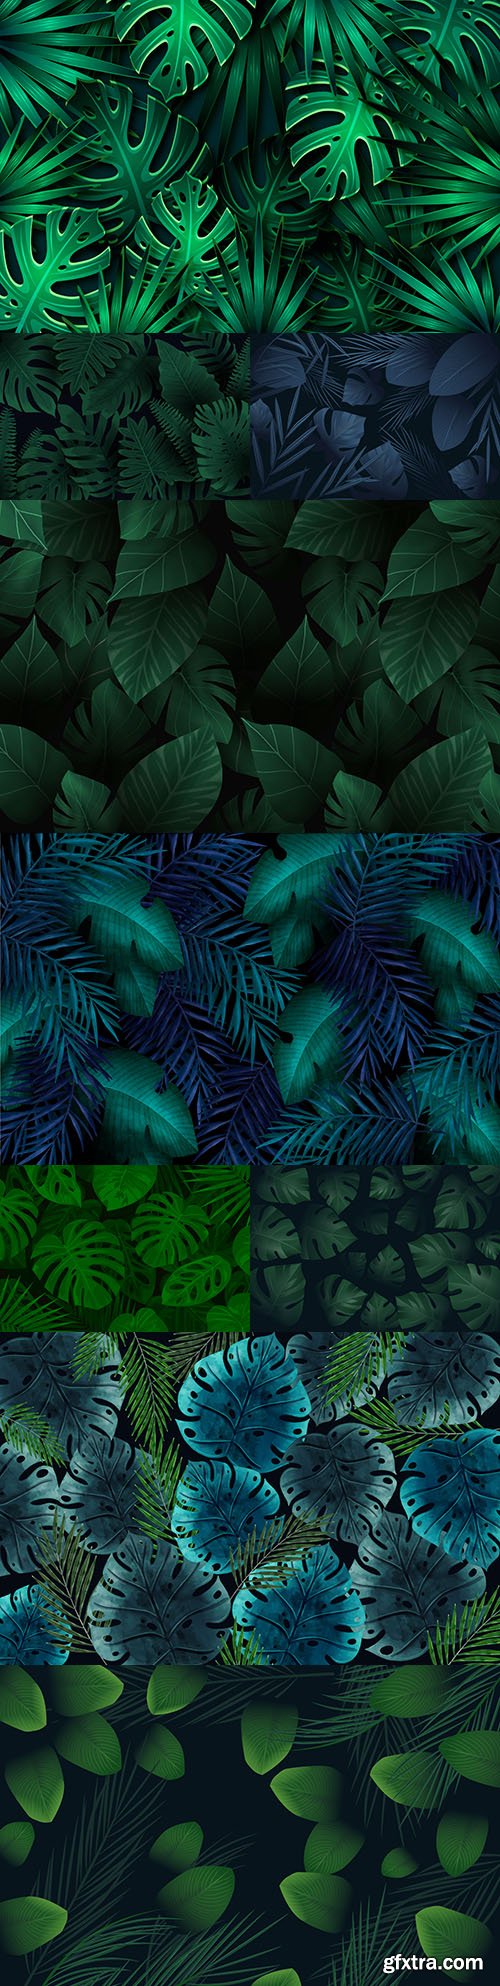 Tropical green leaves decorative background